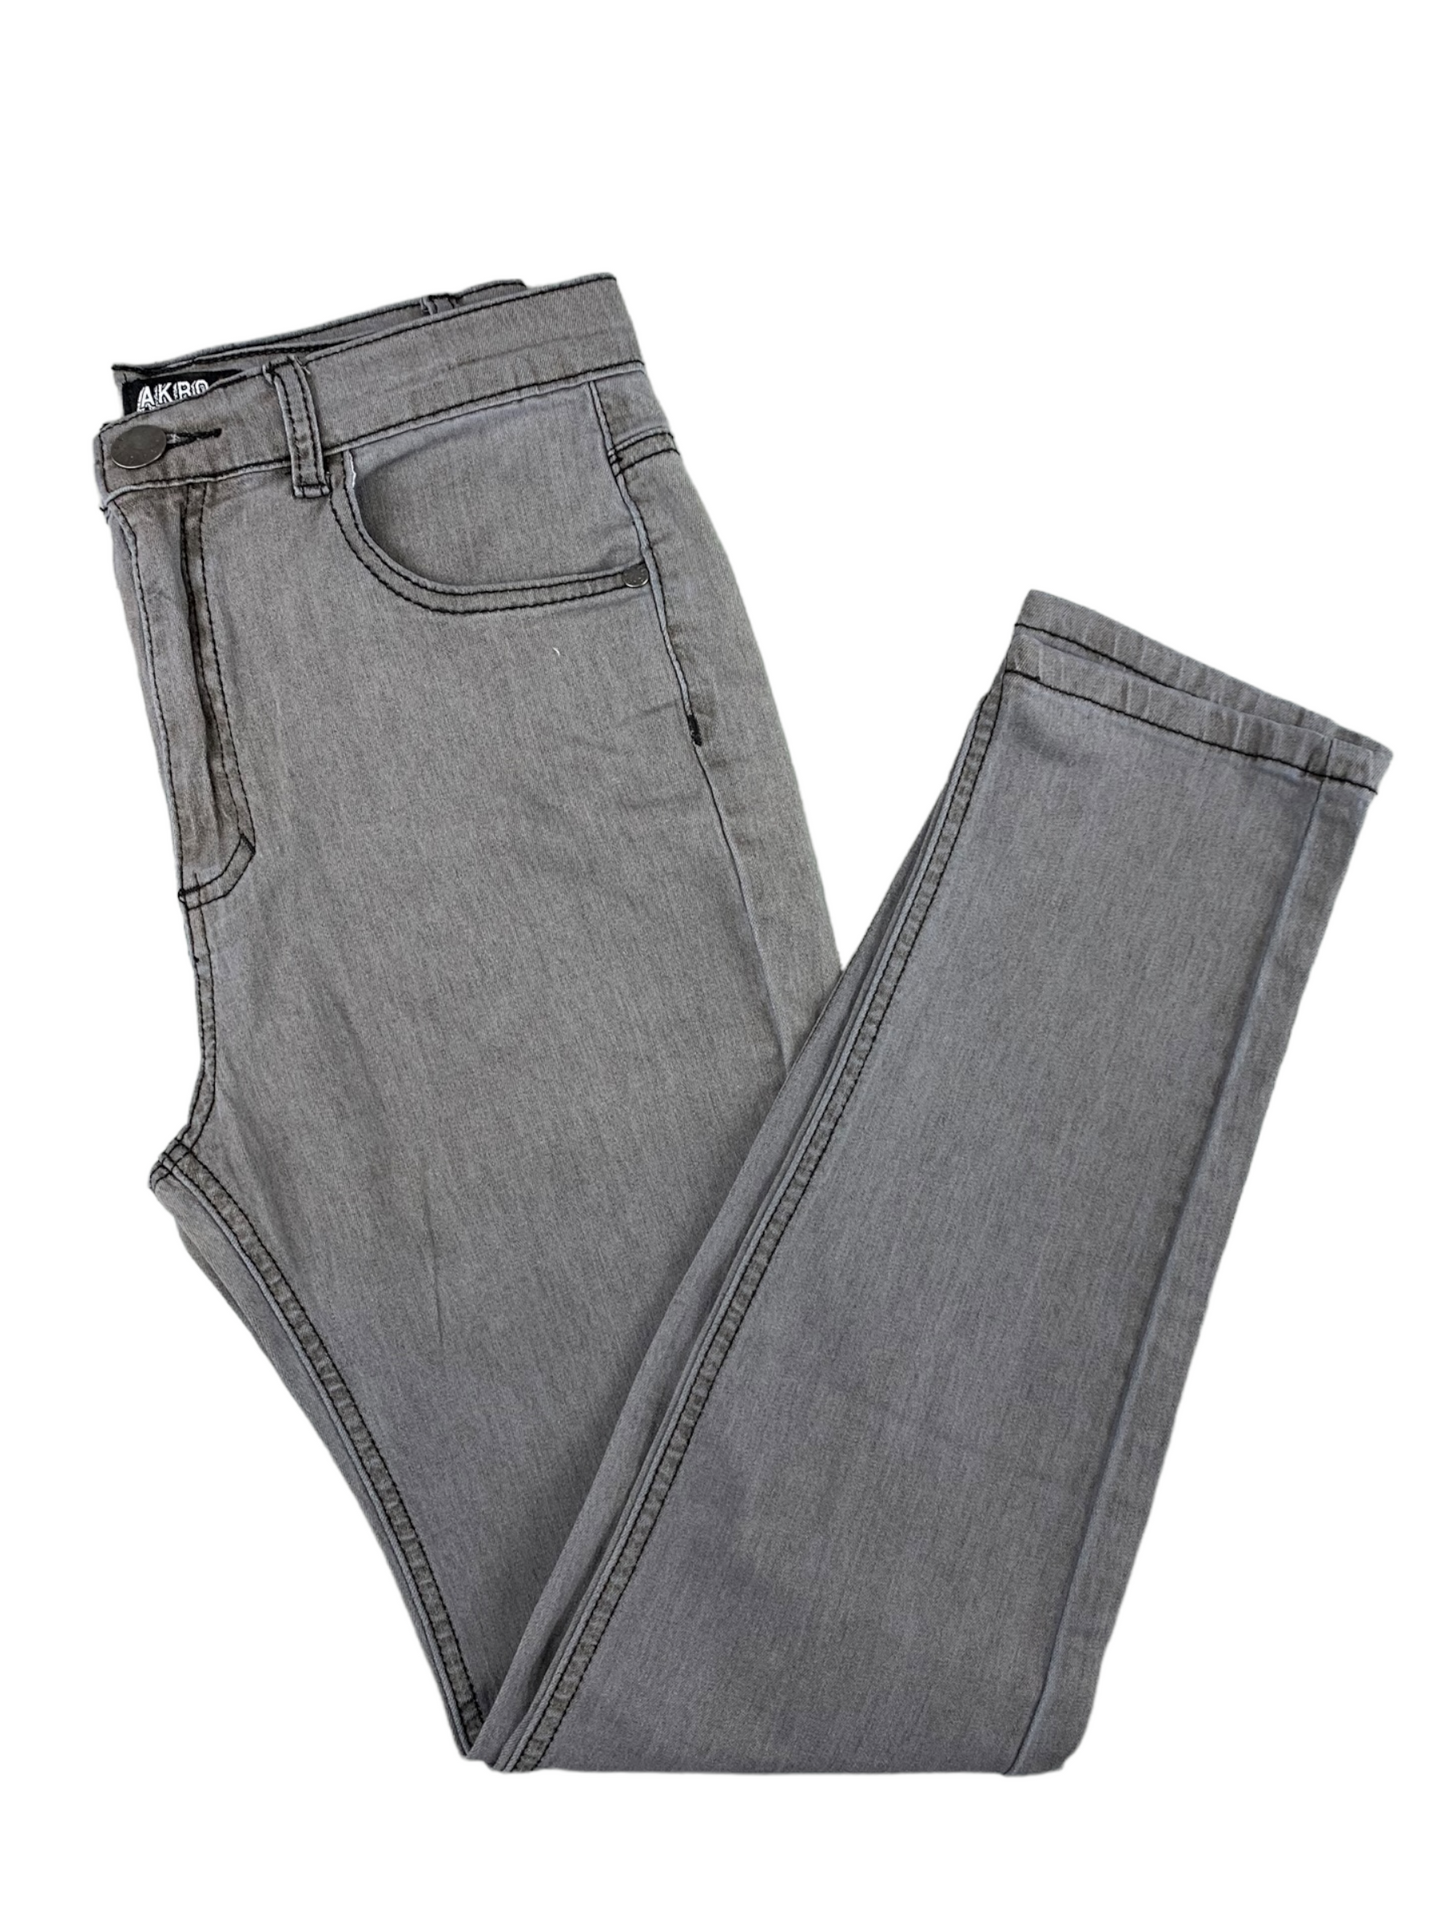 Moms gray jeans AKRO 10 to 16 years na-FW21